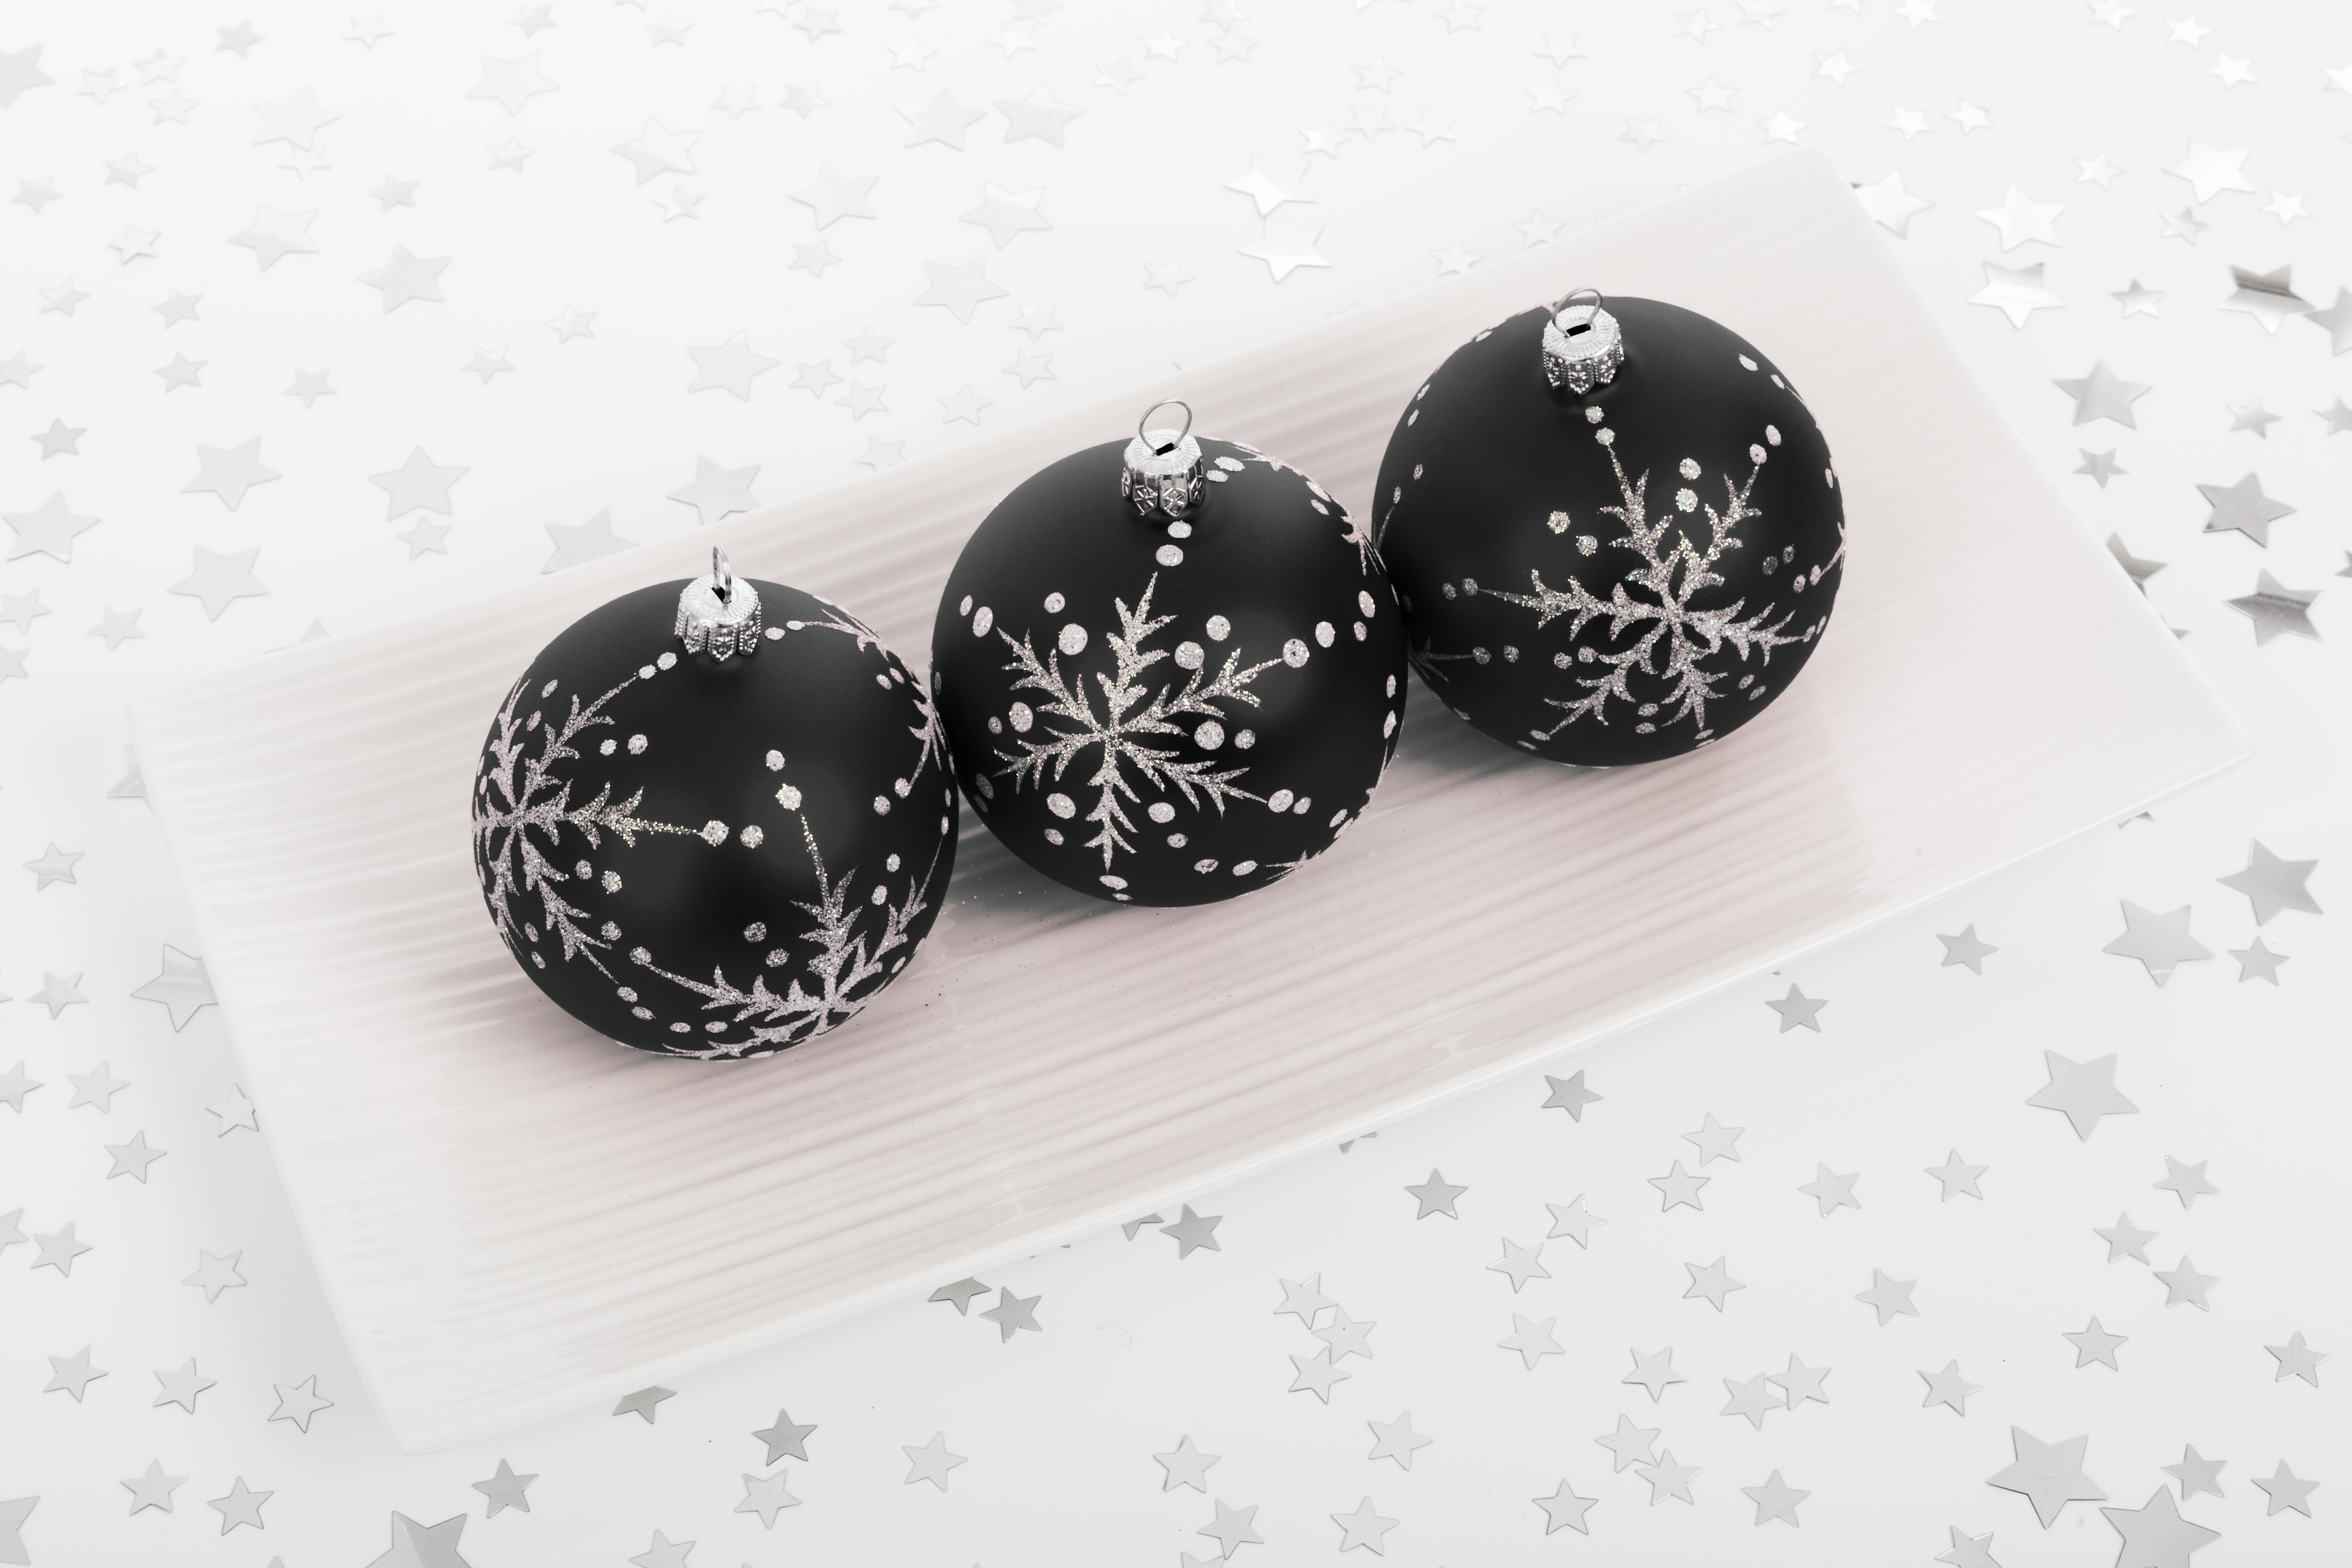 32 gray and black baubles